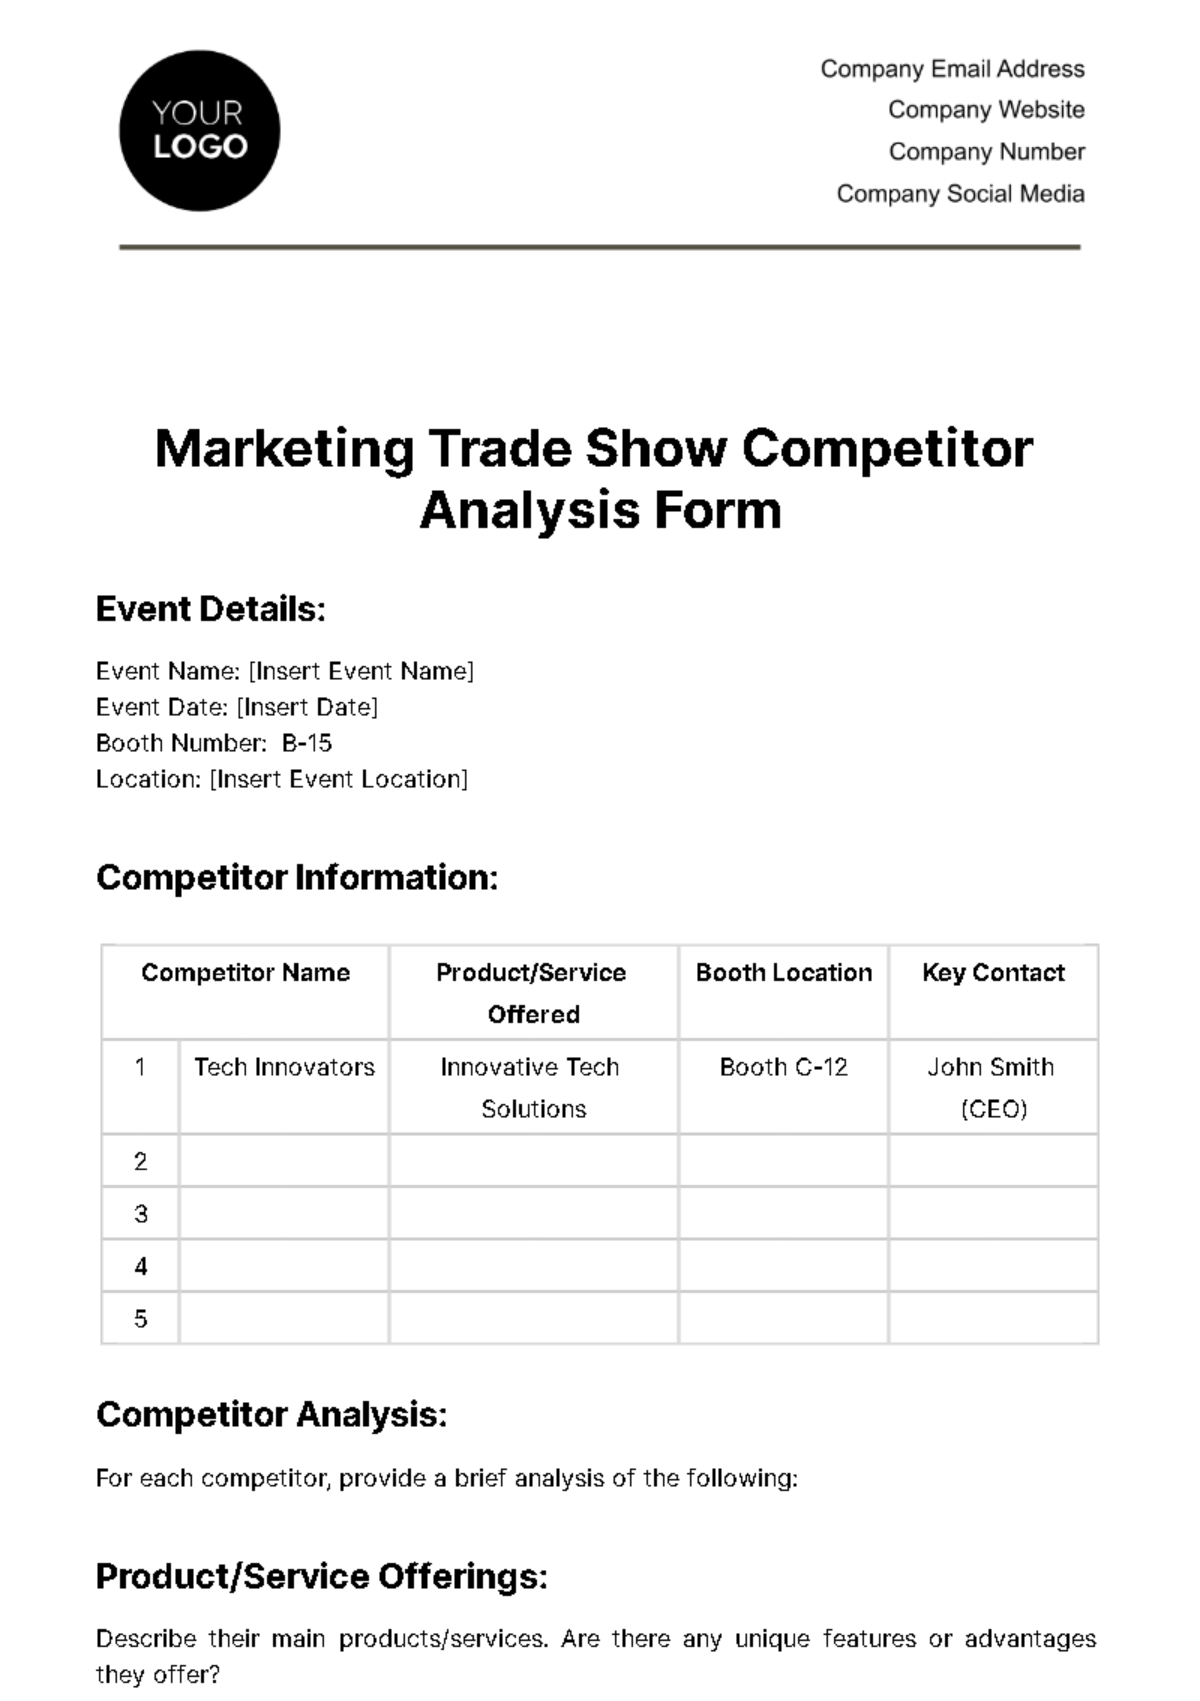 Free Marketing Trade Show Competitor Analysis Form Template